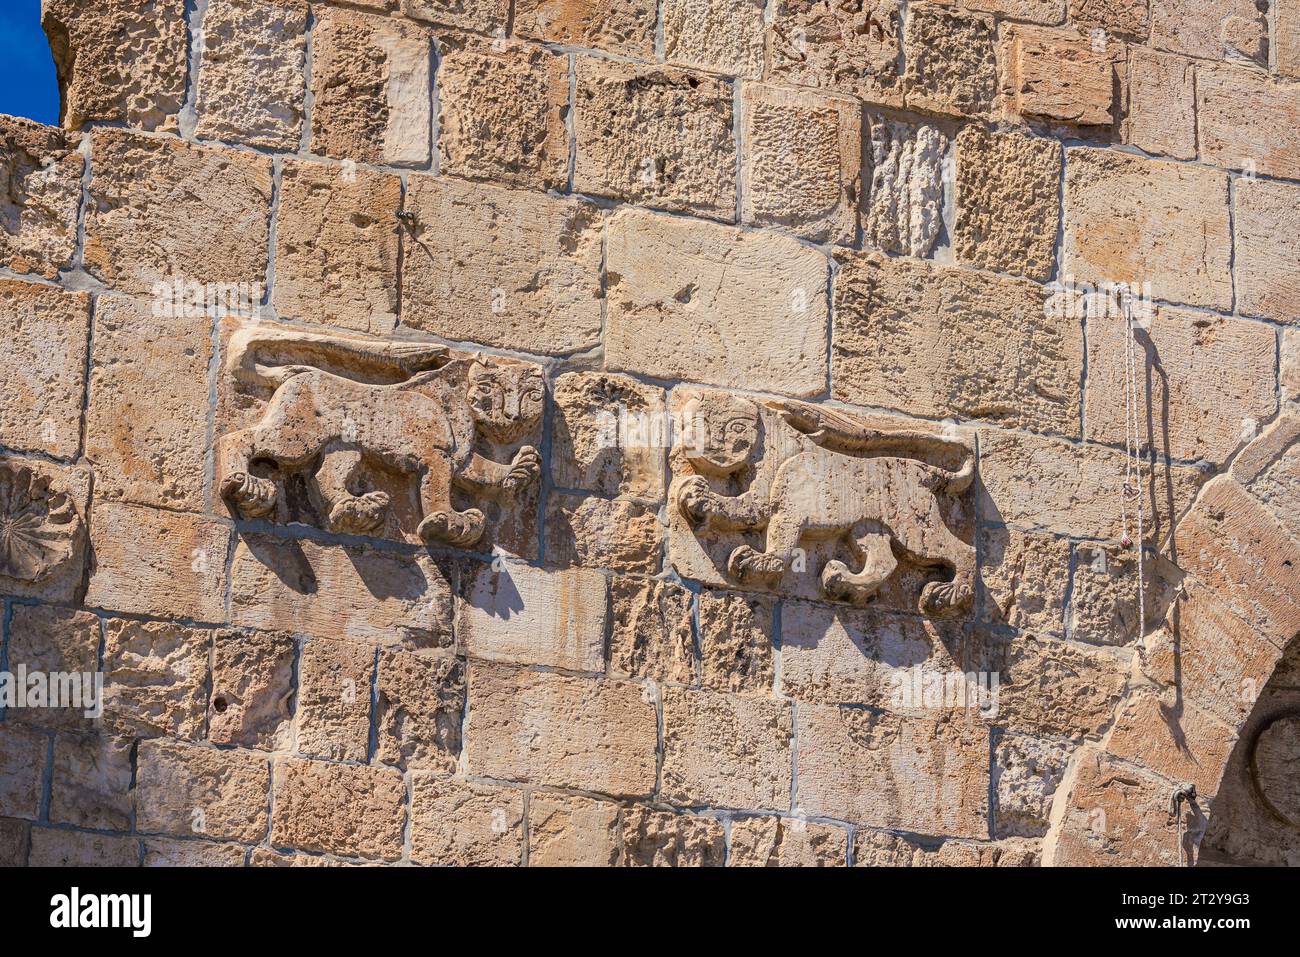 Lions' Gate is one of the seven entrances to the Old City of Jerusalem. It is named after the Lions carved on its wall. Stock Photo